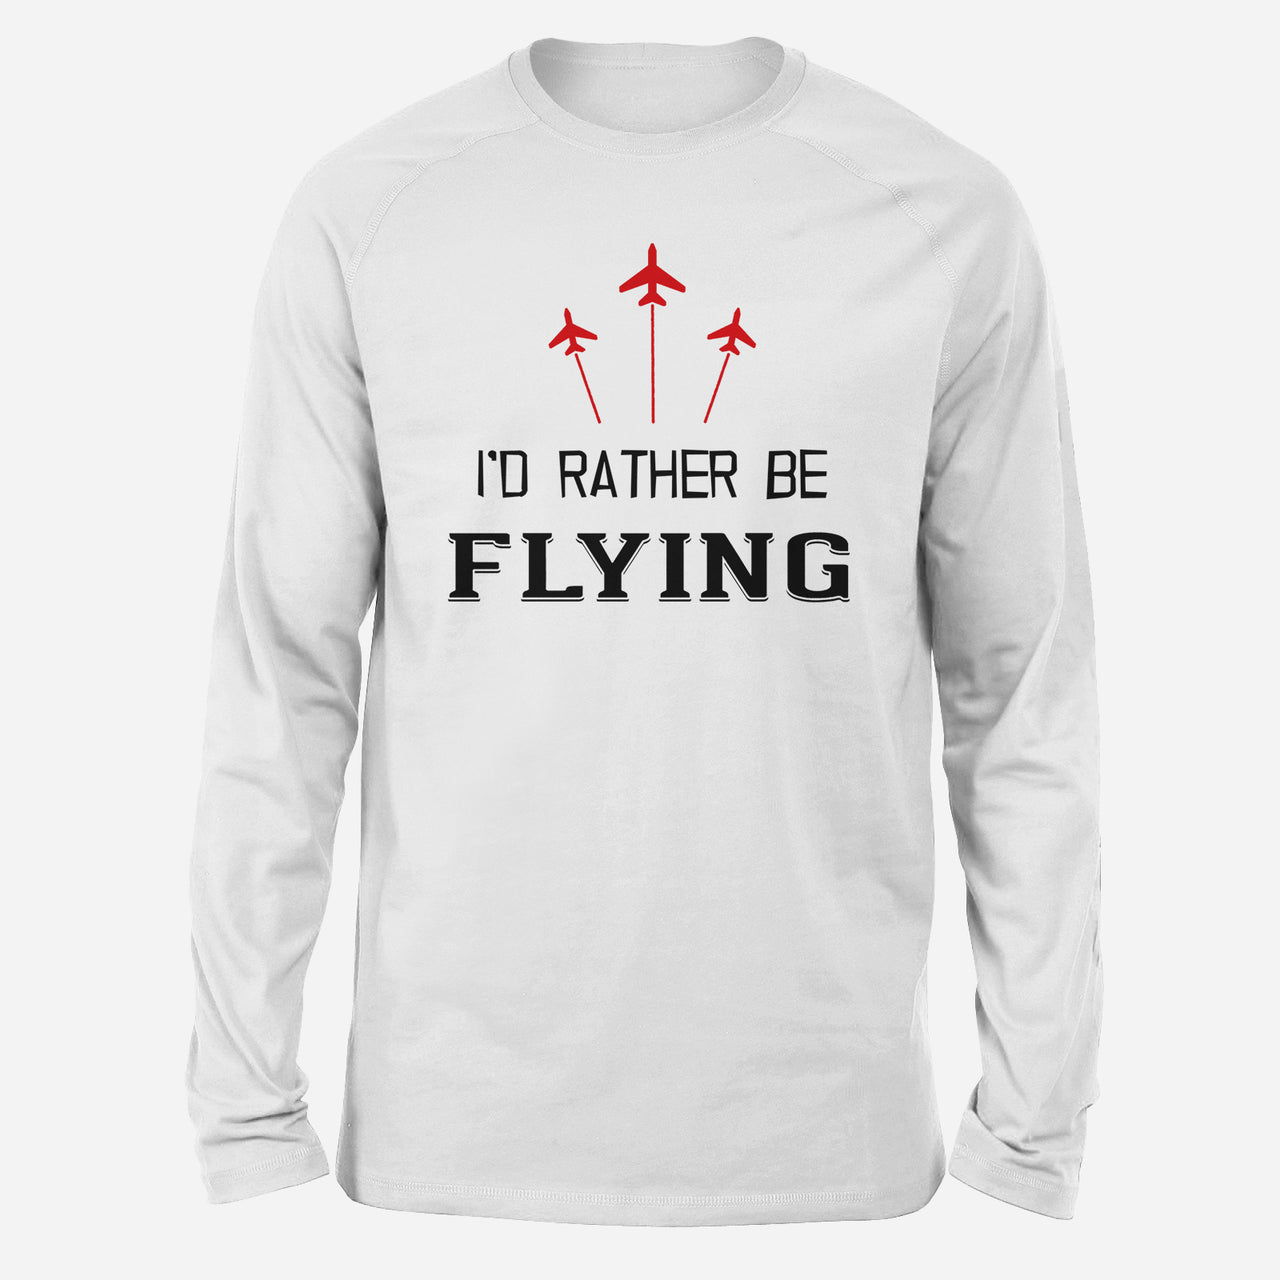 I'D Rather Be Flying Designed Long-Sleeve T-Shirts